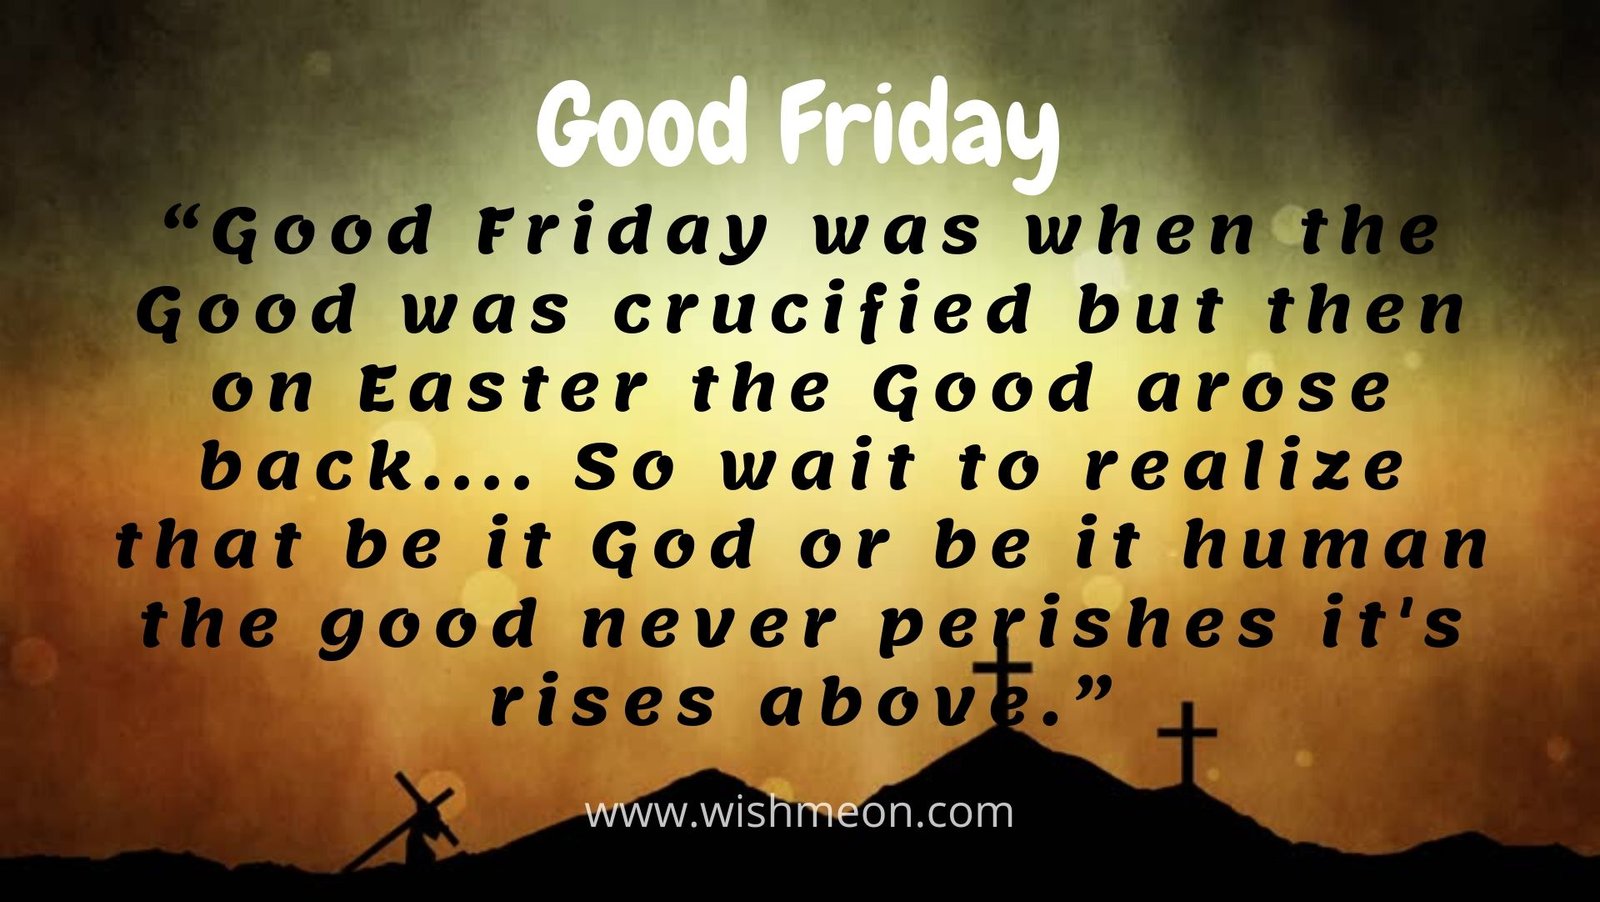 22 Most Popular Good Friday Wishes Messaging and Quotes - Wish Me On